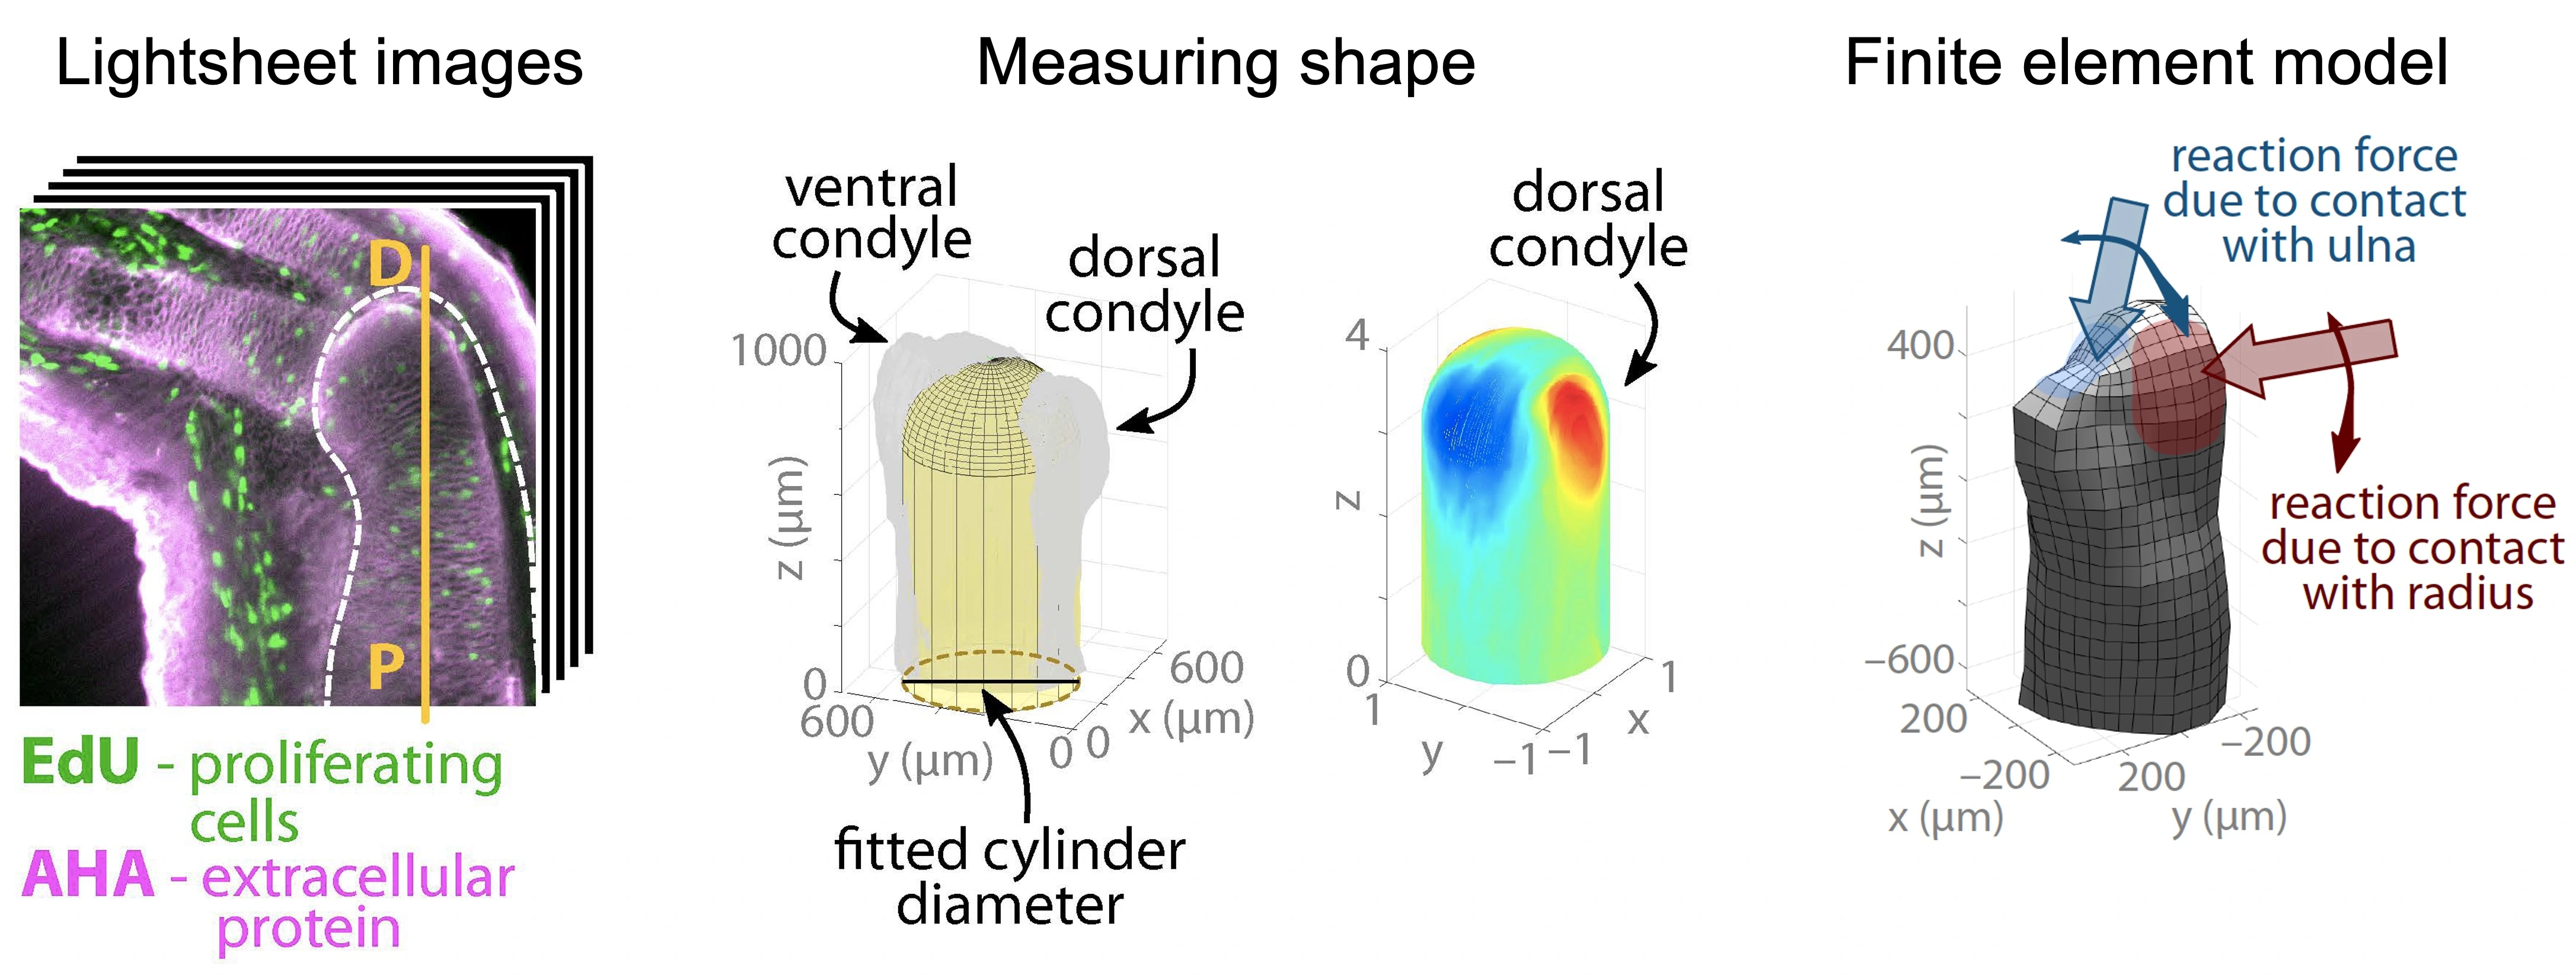 A lightsheet image is segemented to measure joint shape and create a finite element model.